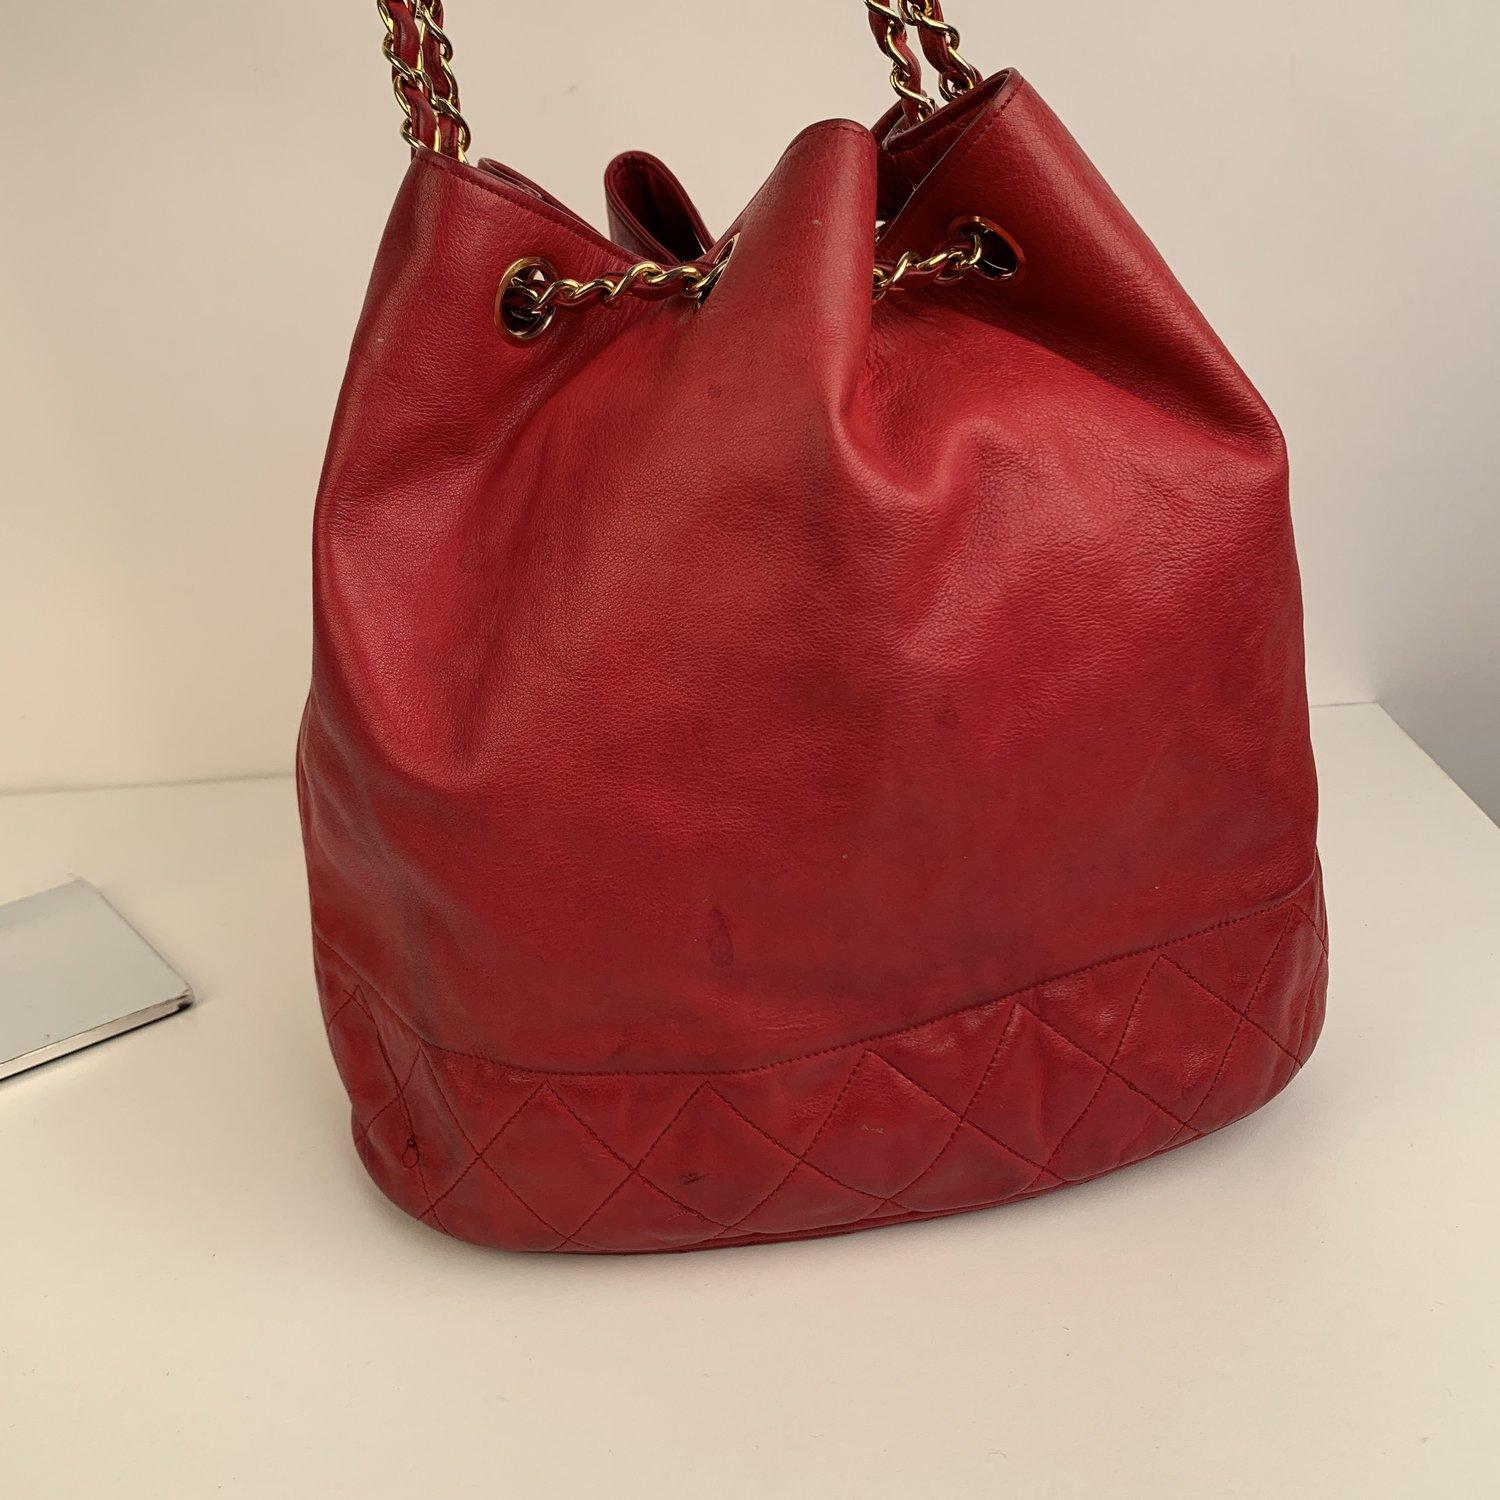 Chanel Vintage Red Leather Bucket Shoulder Bag with Bottom Quilting 3